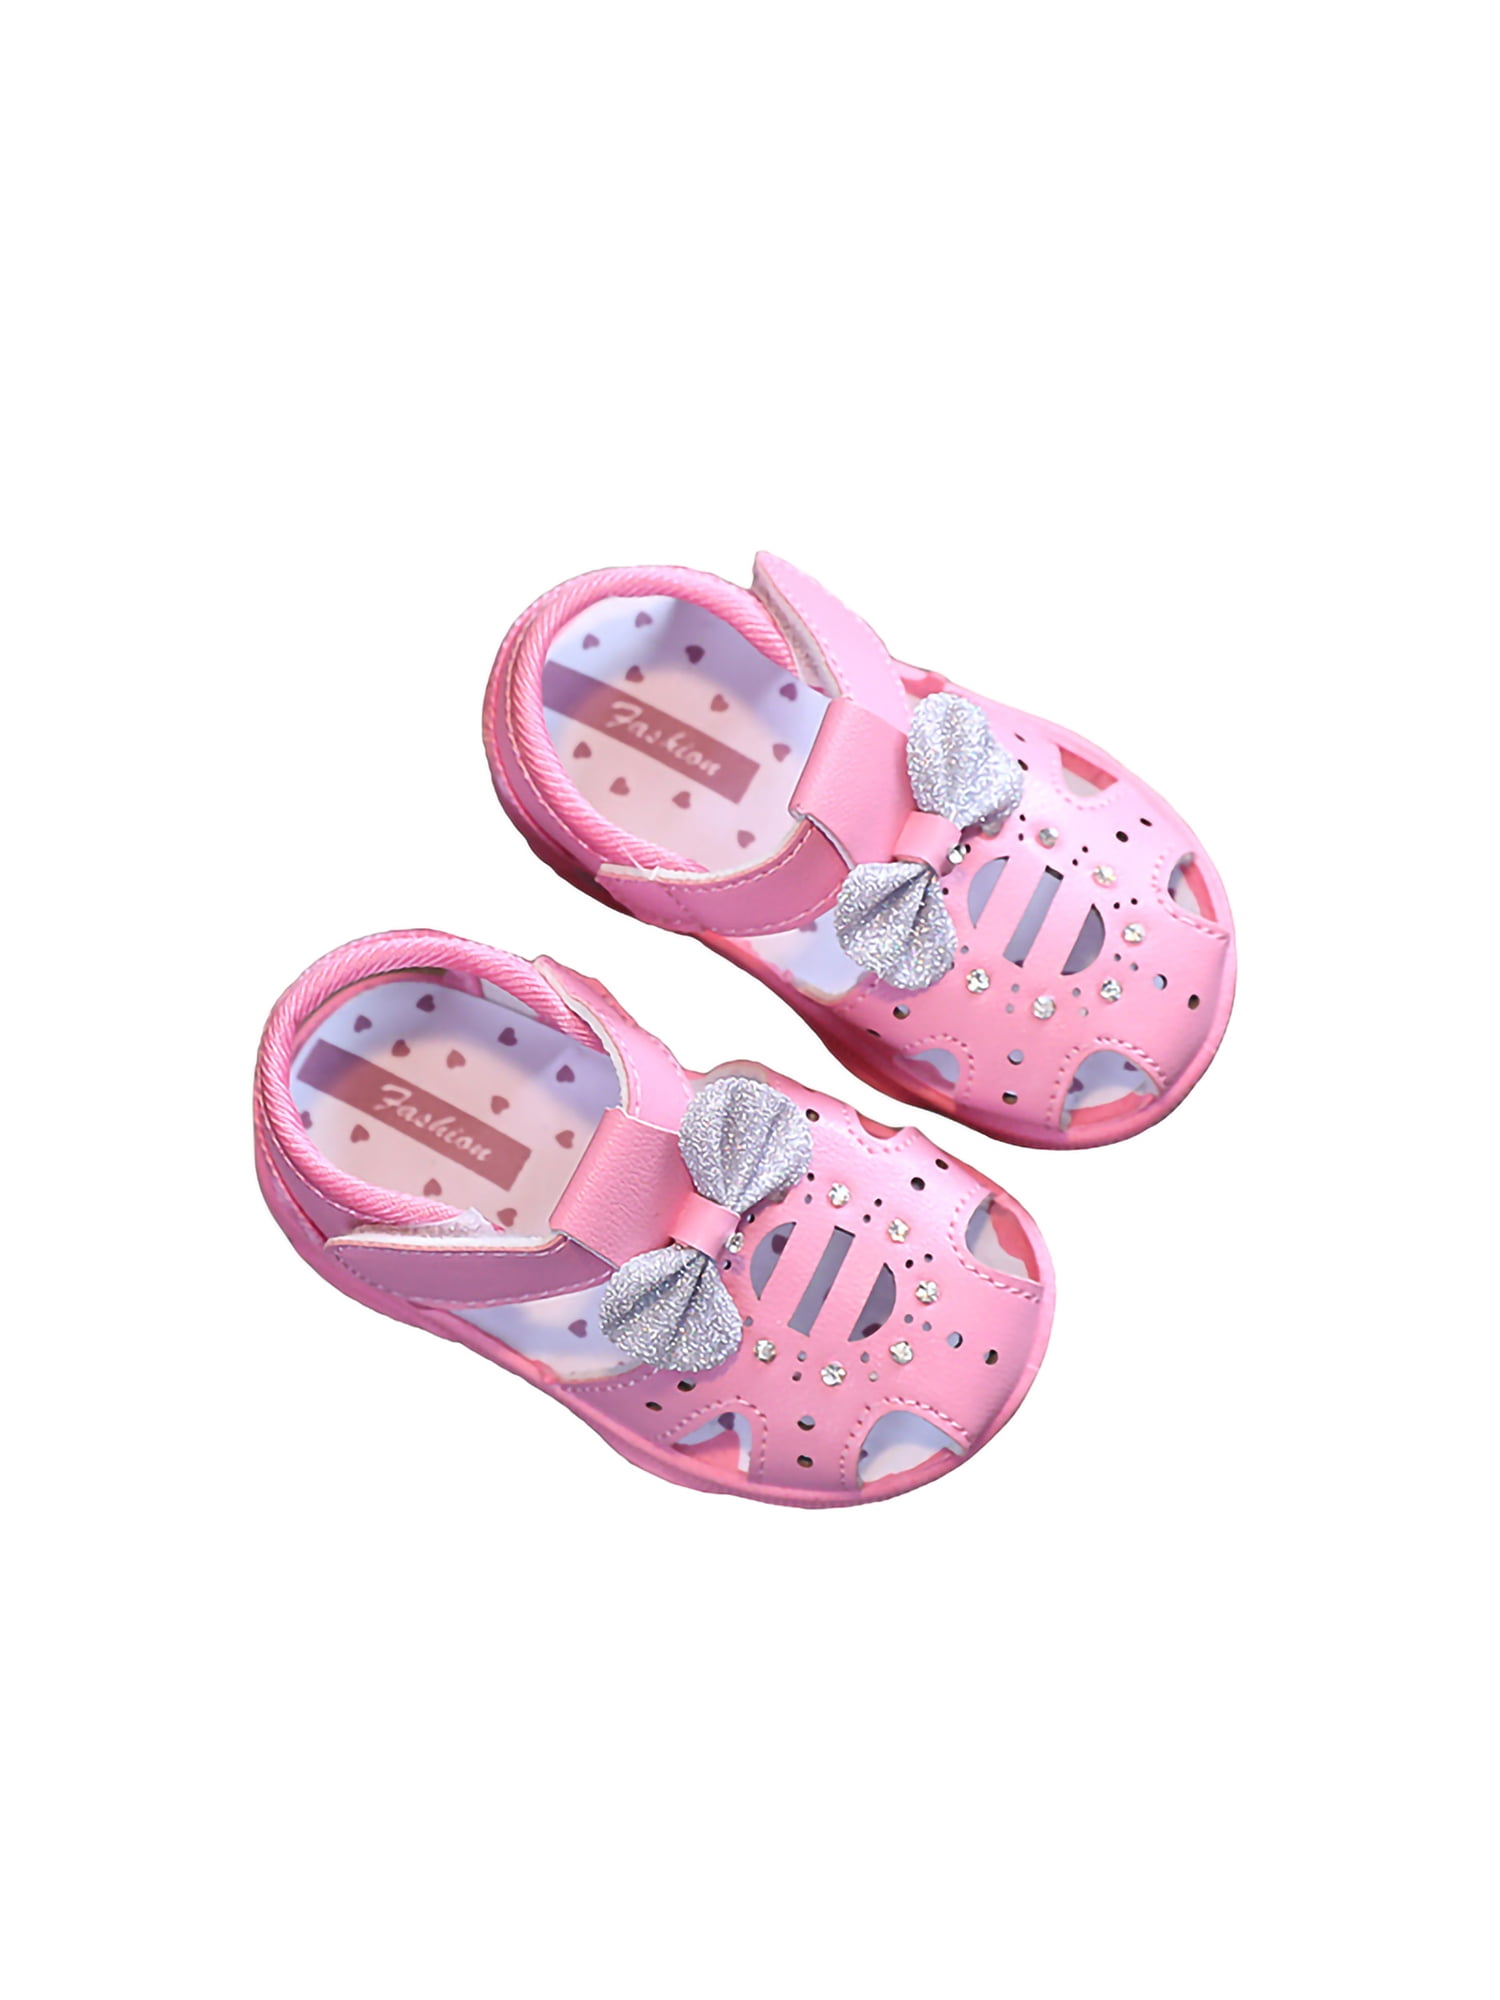 Baby girl baby soft bottom shoes Velcro hollow breathable princess shoes toddler